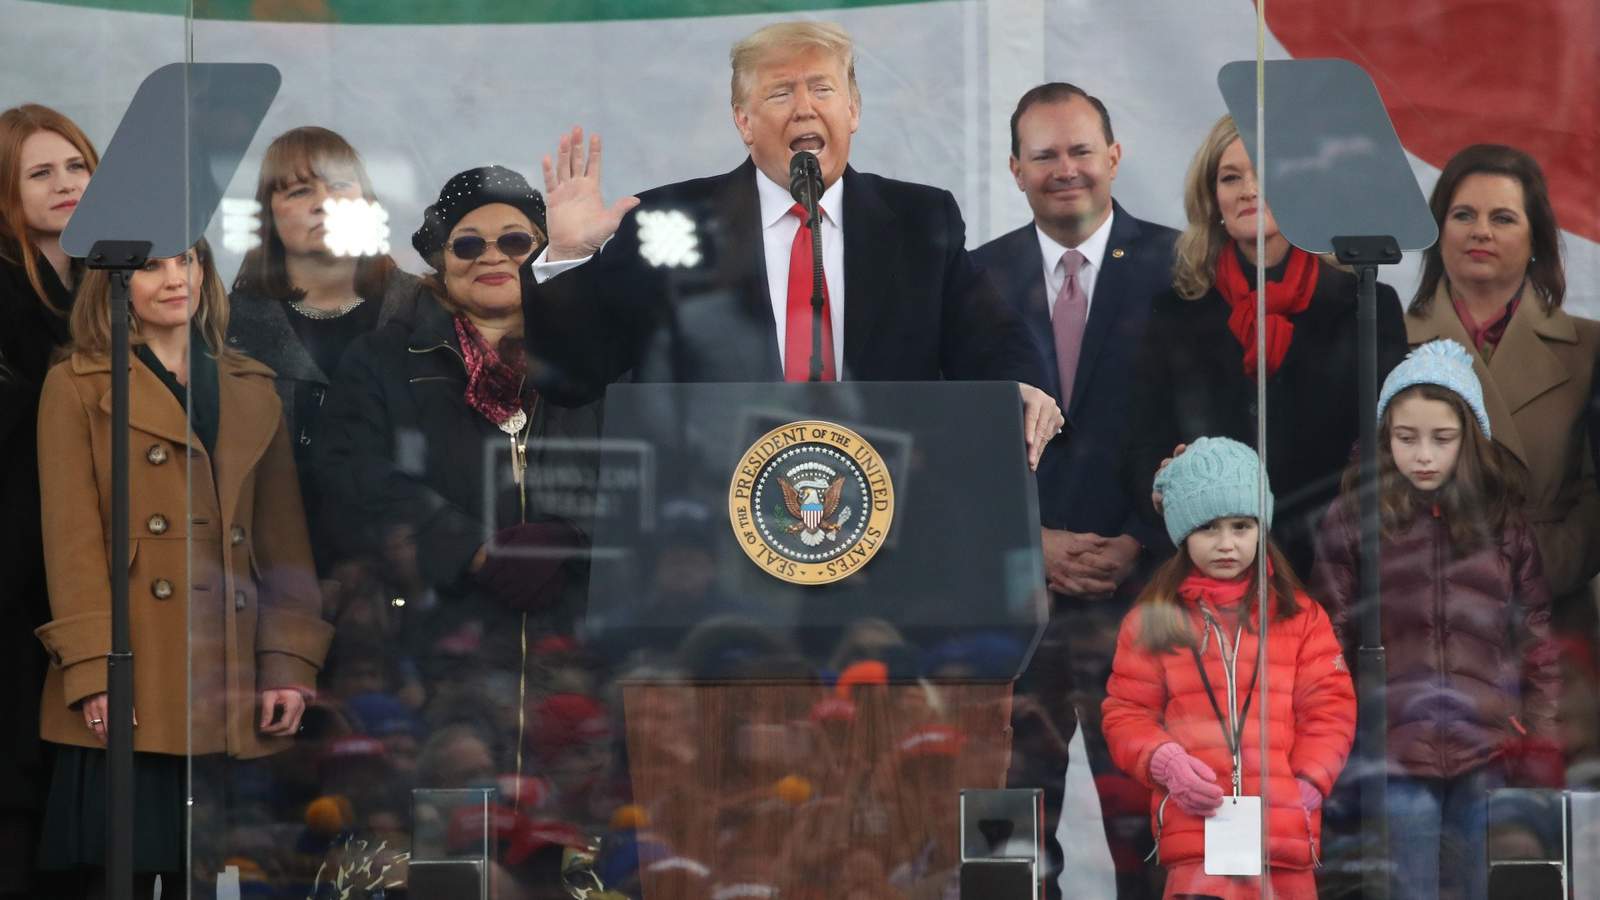 WATCH: President Trump speaks at March for Life rally